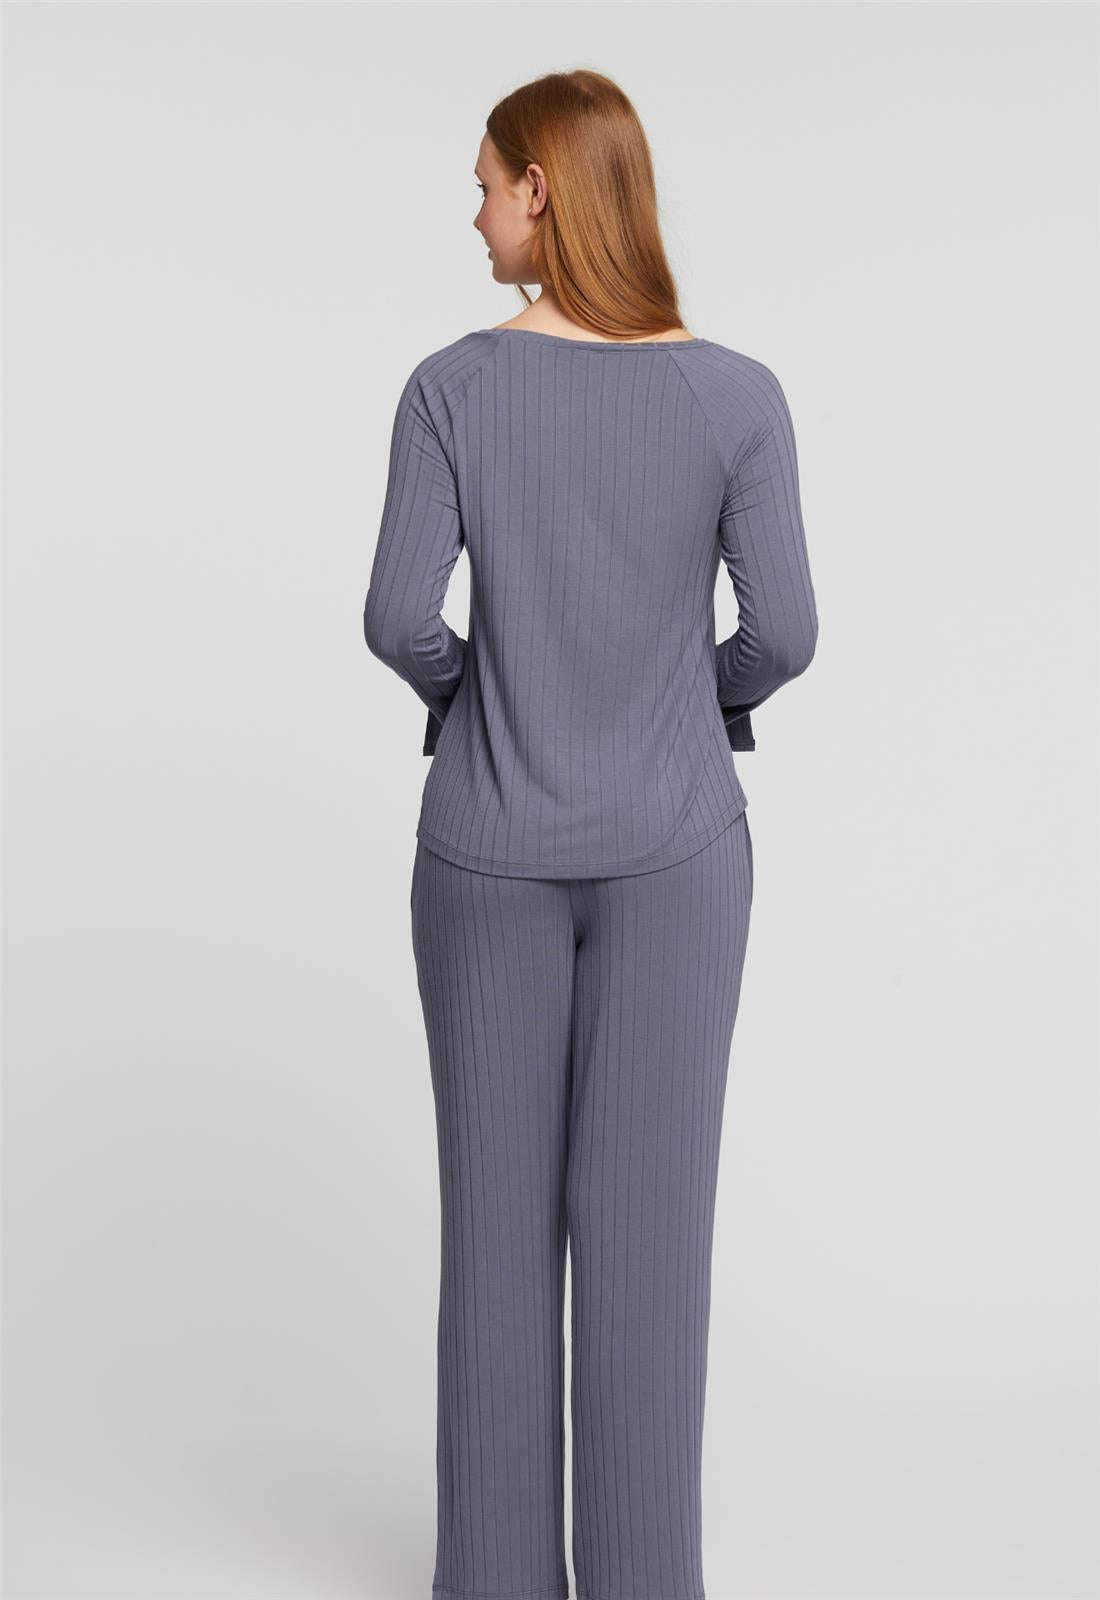 Ribbed Long Sleeve PJ Set - French Grey worn by model back view